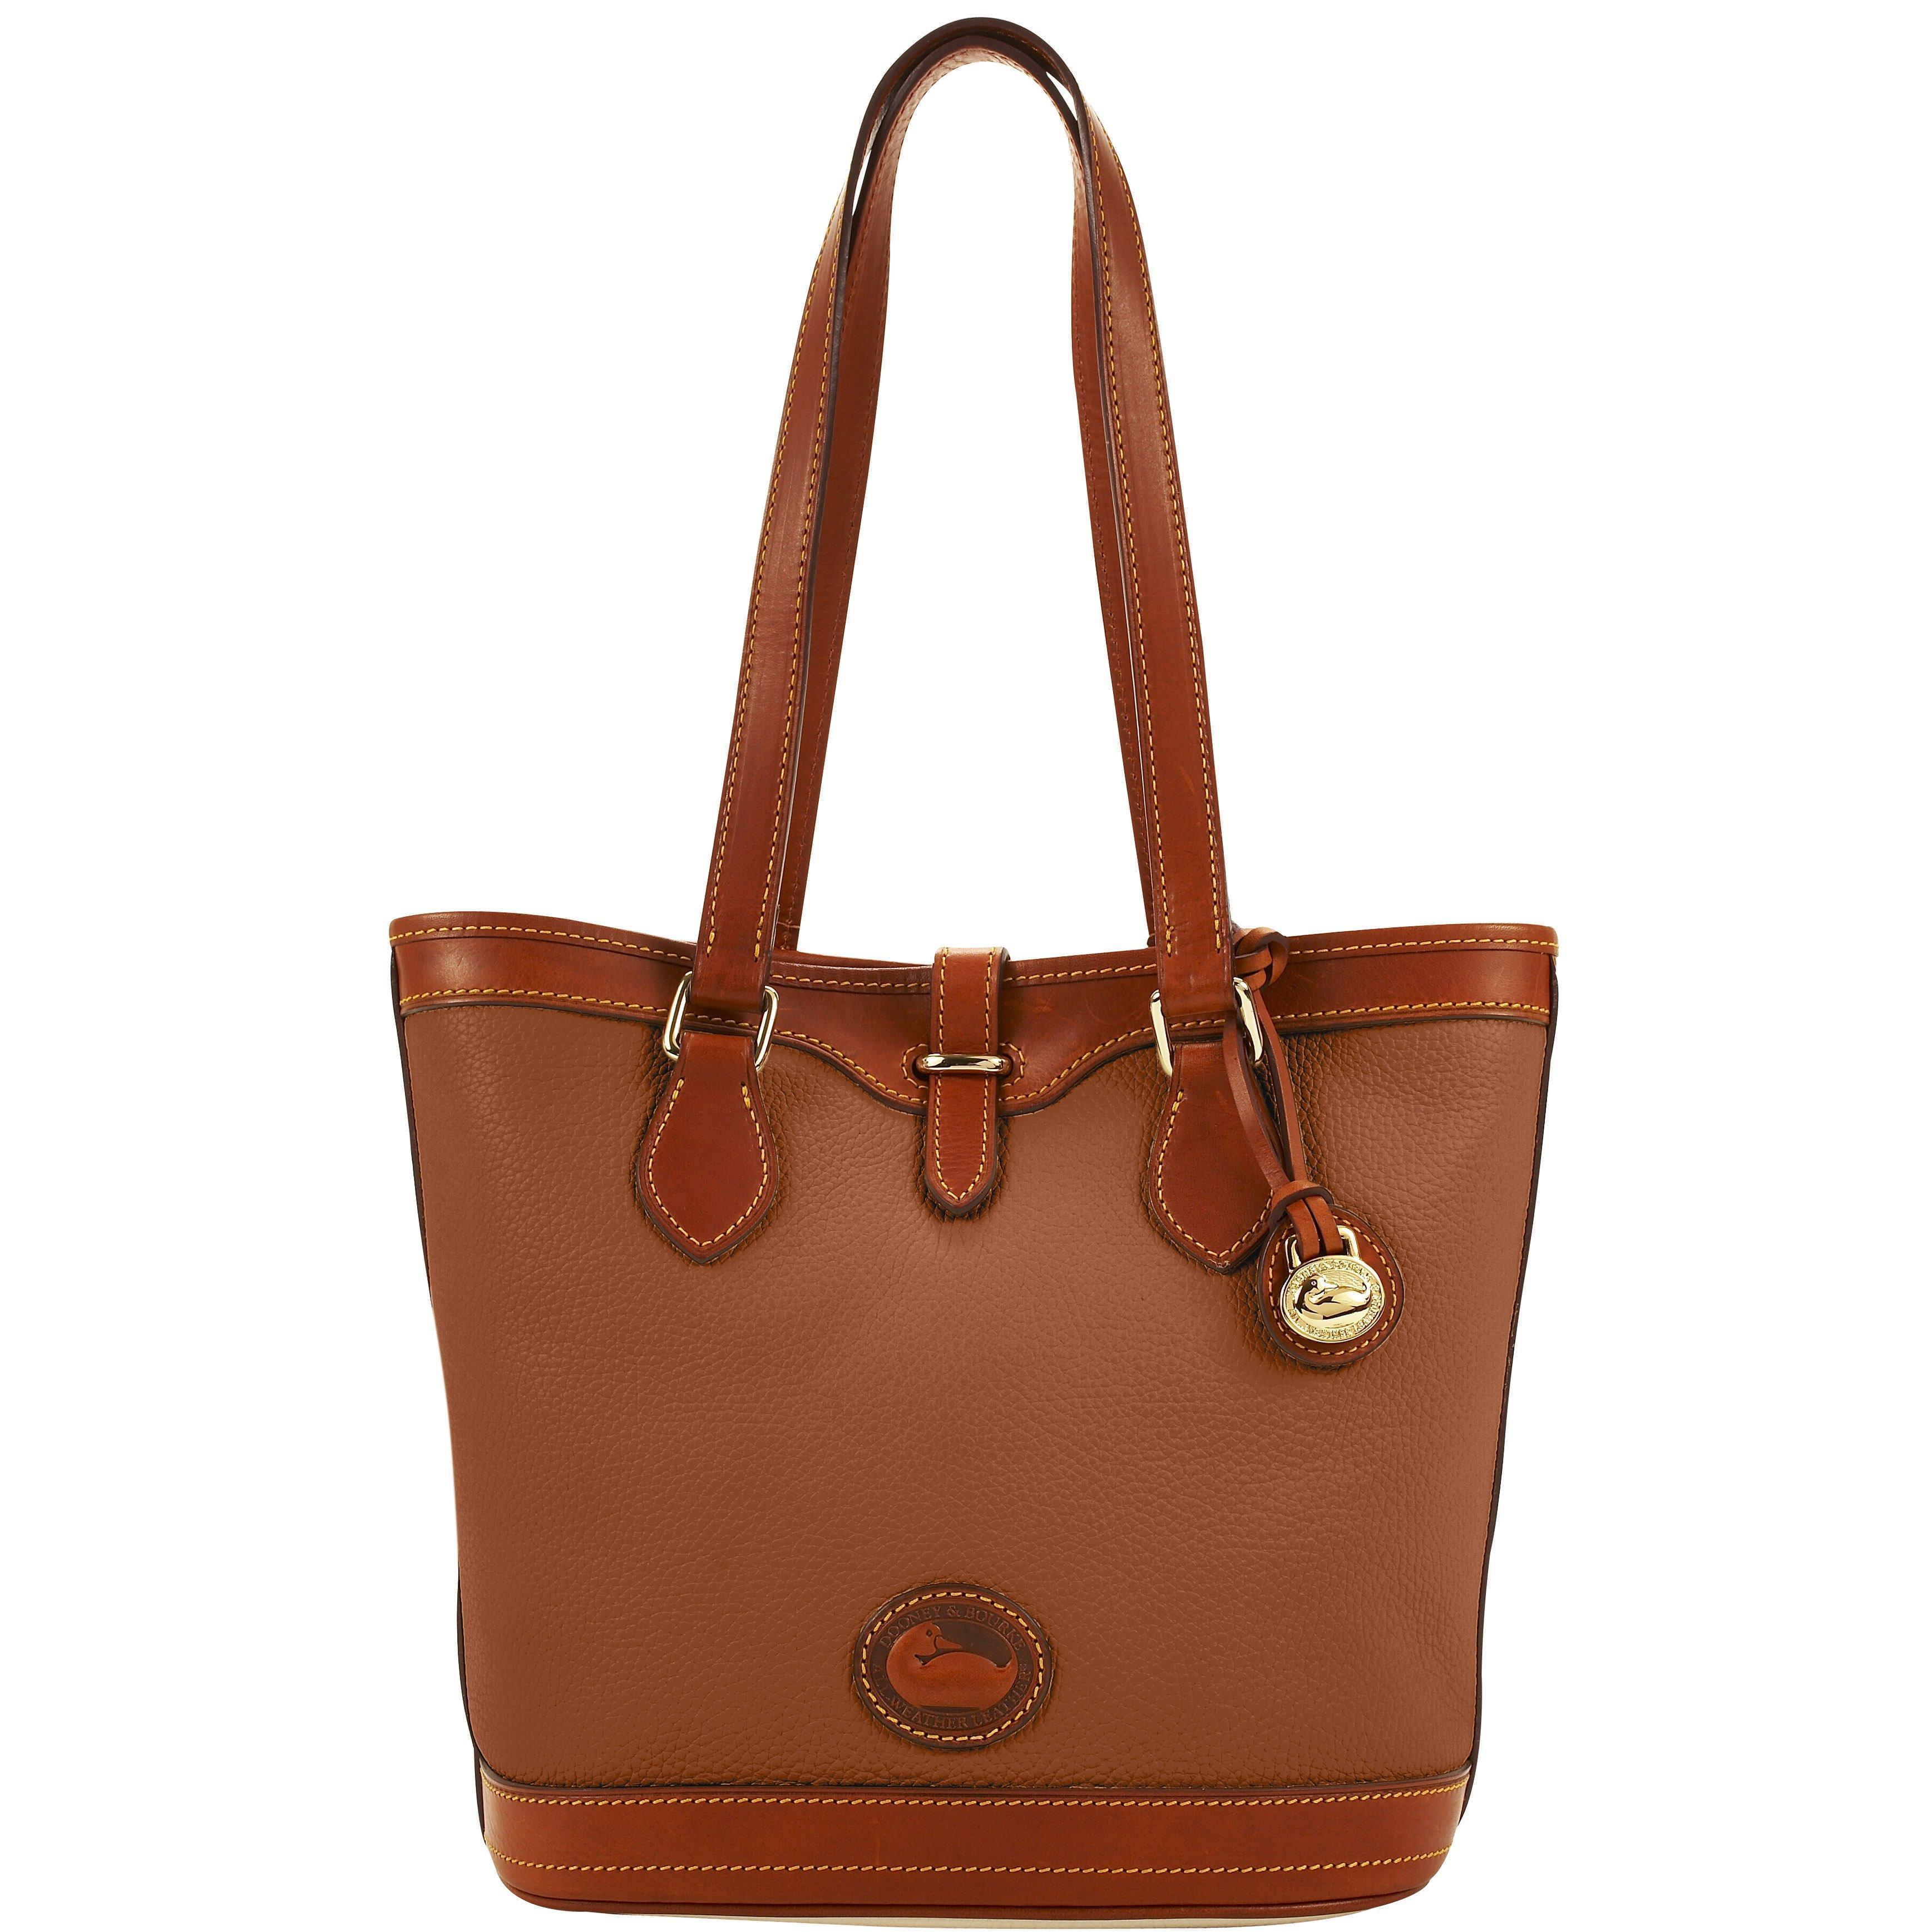 Dooney & Bourke All Weather Leather 2 Bucket Bag in Tan (Red) - Lyst